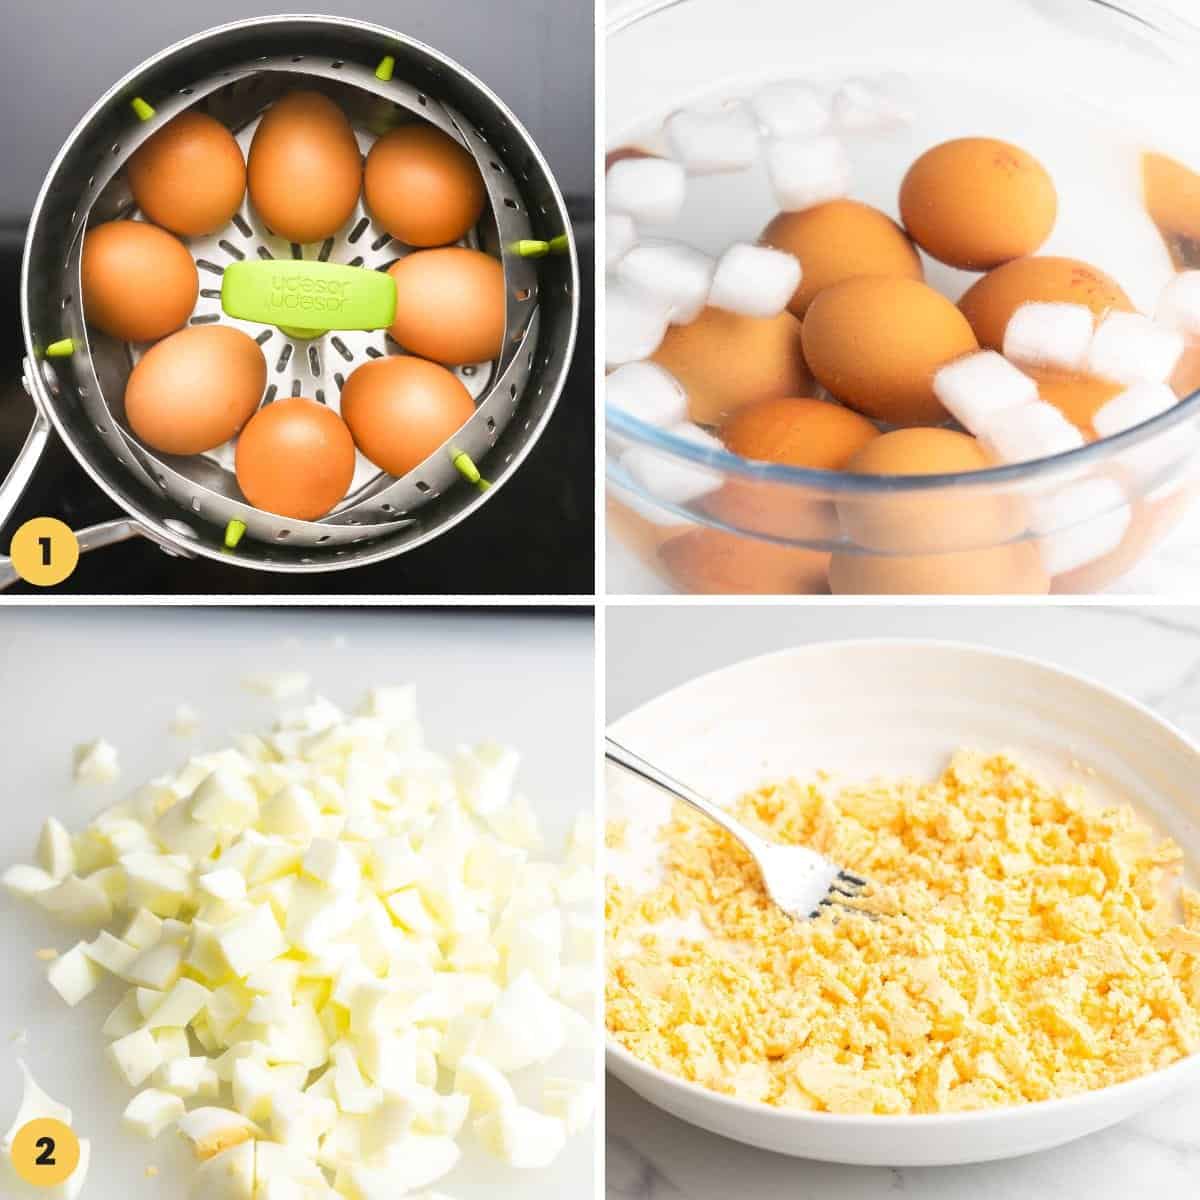 A collage of three images showing how to steam eggs and prepare them for egg salad.